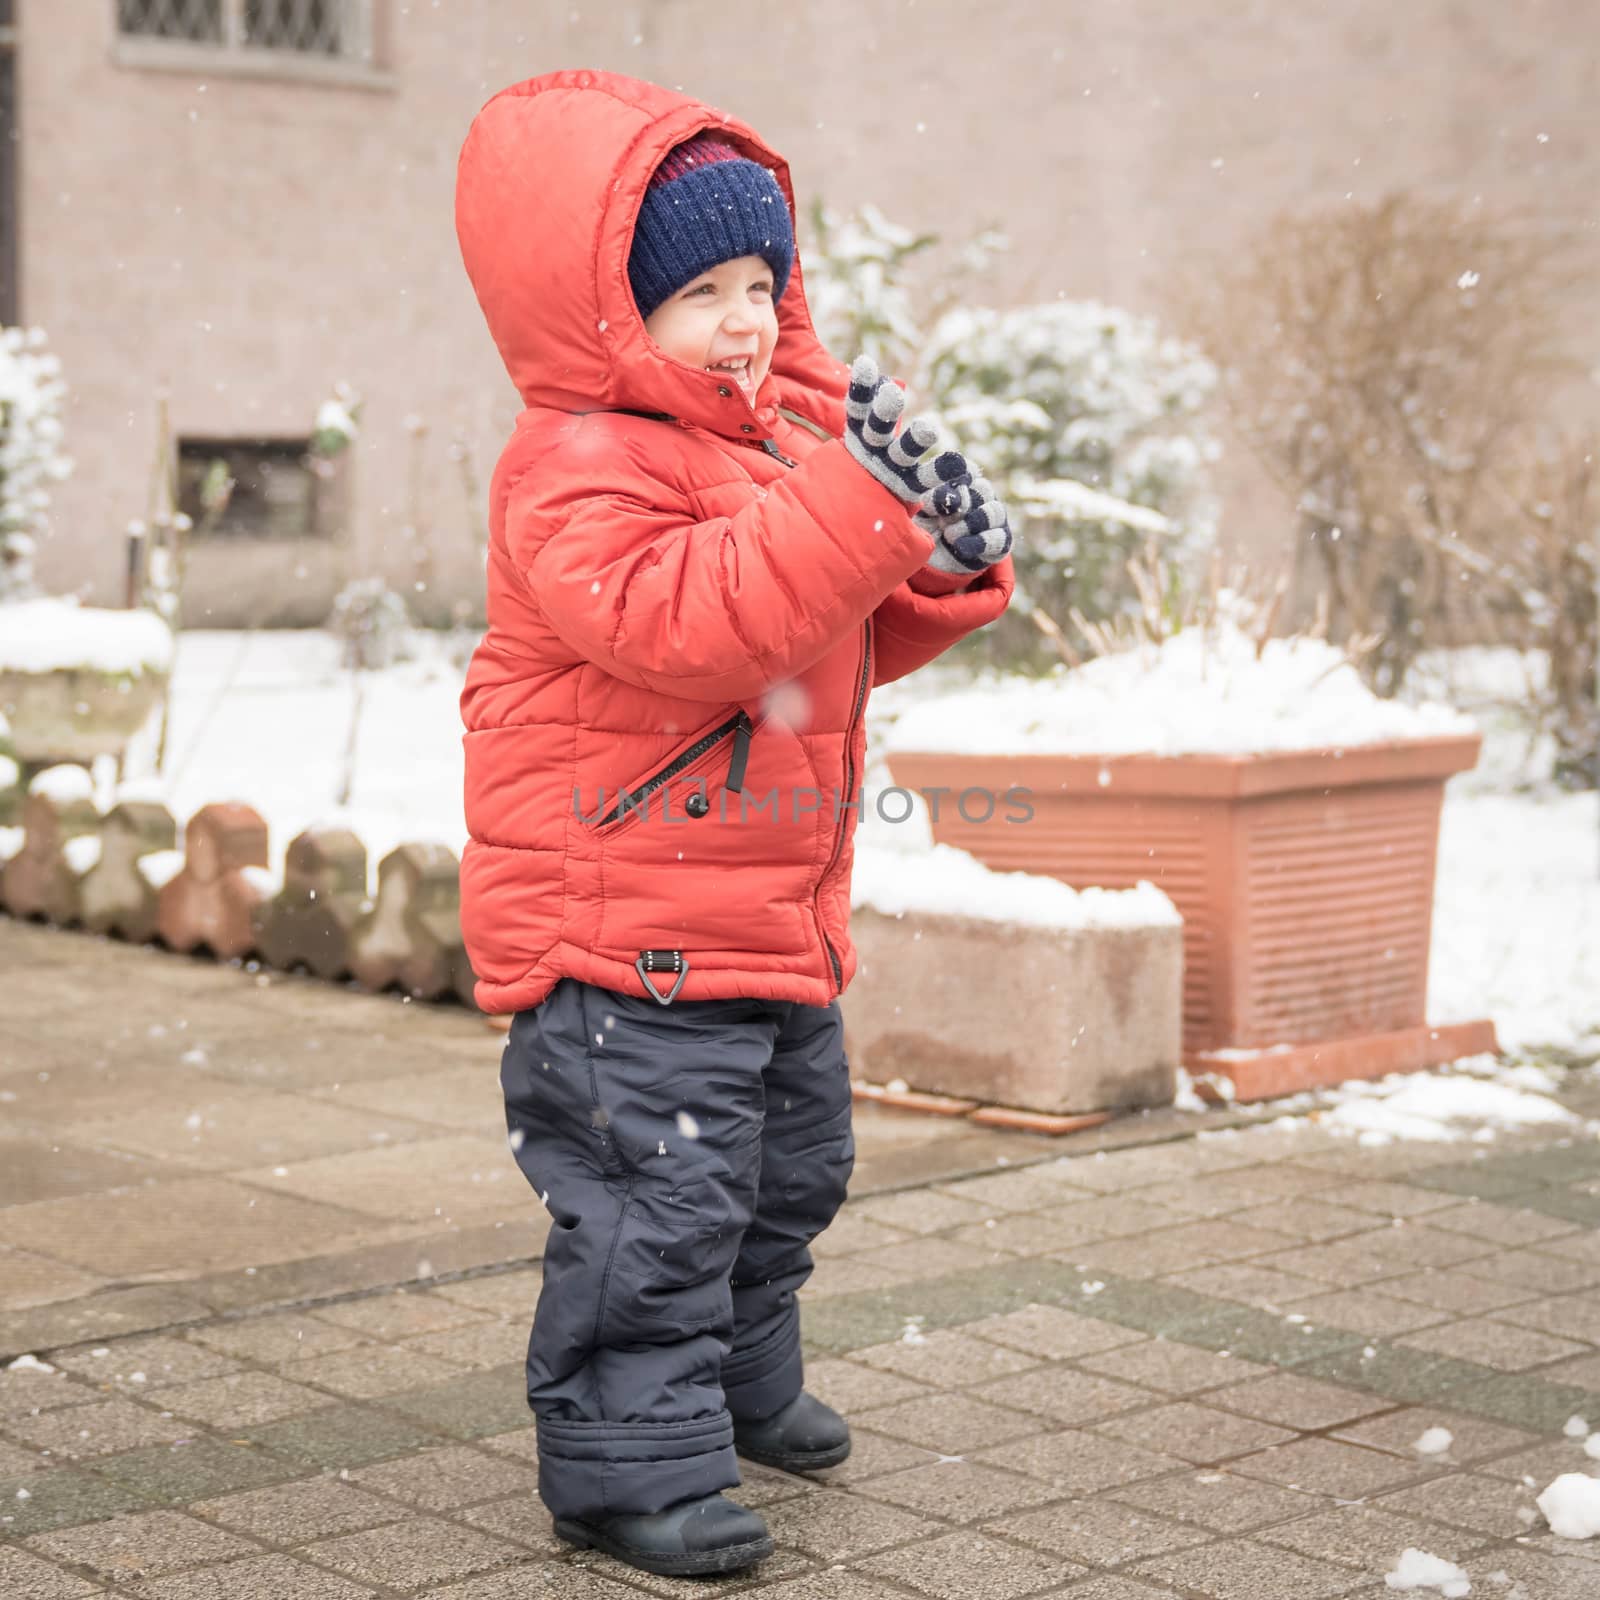 Baby boy smiles cheerfully while snows by Robertobinetti70